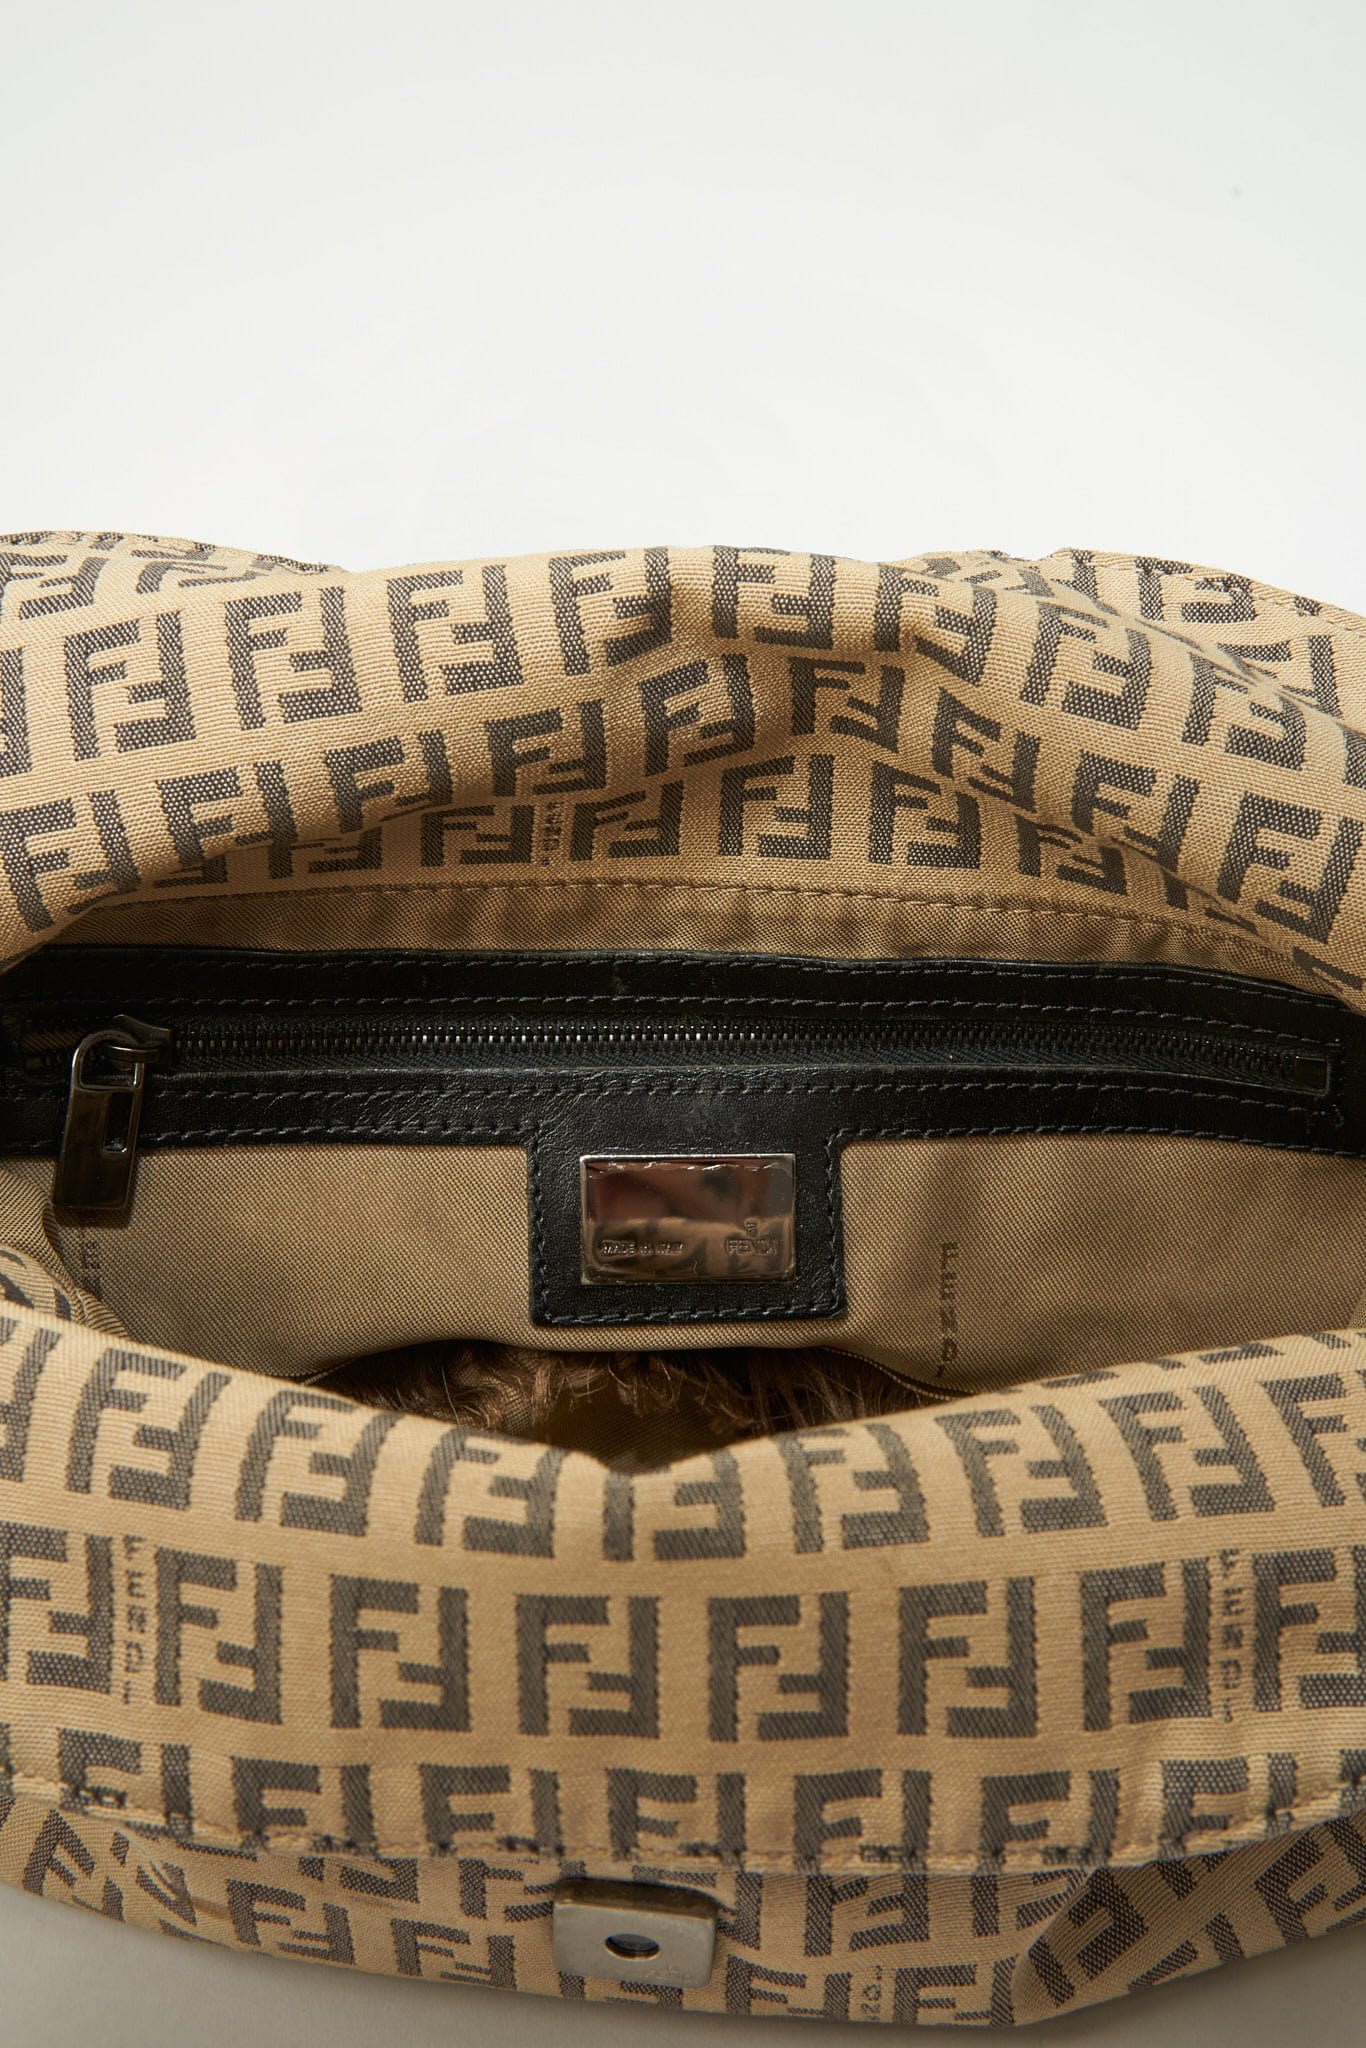 Vintage Fendi Zucchino baguette- Tan And Brown Flap